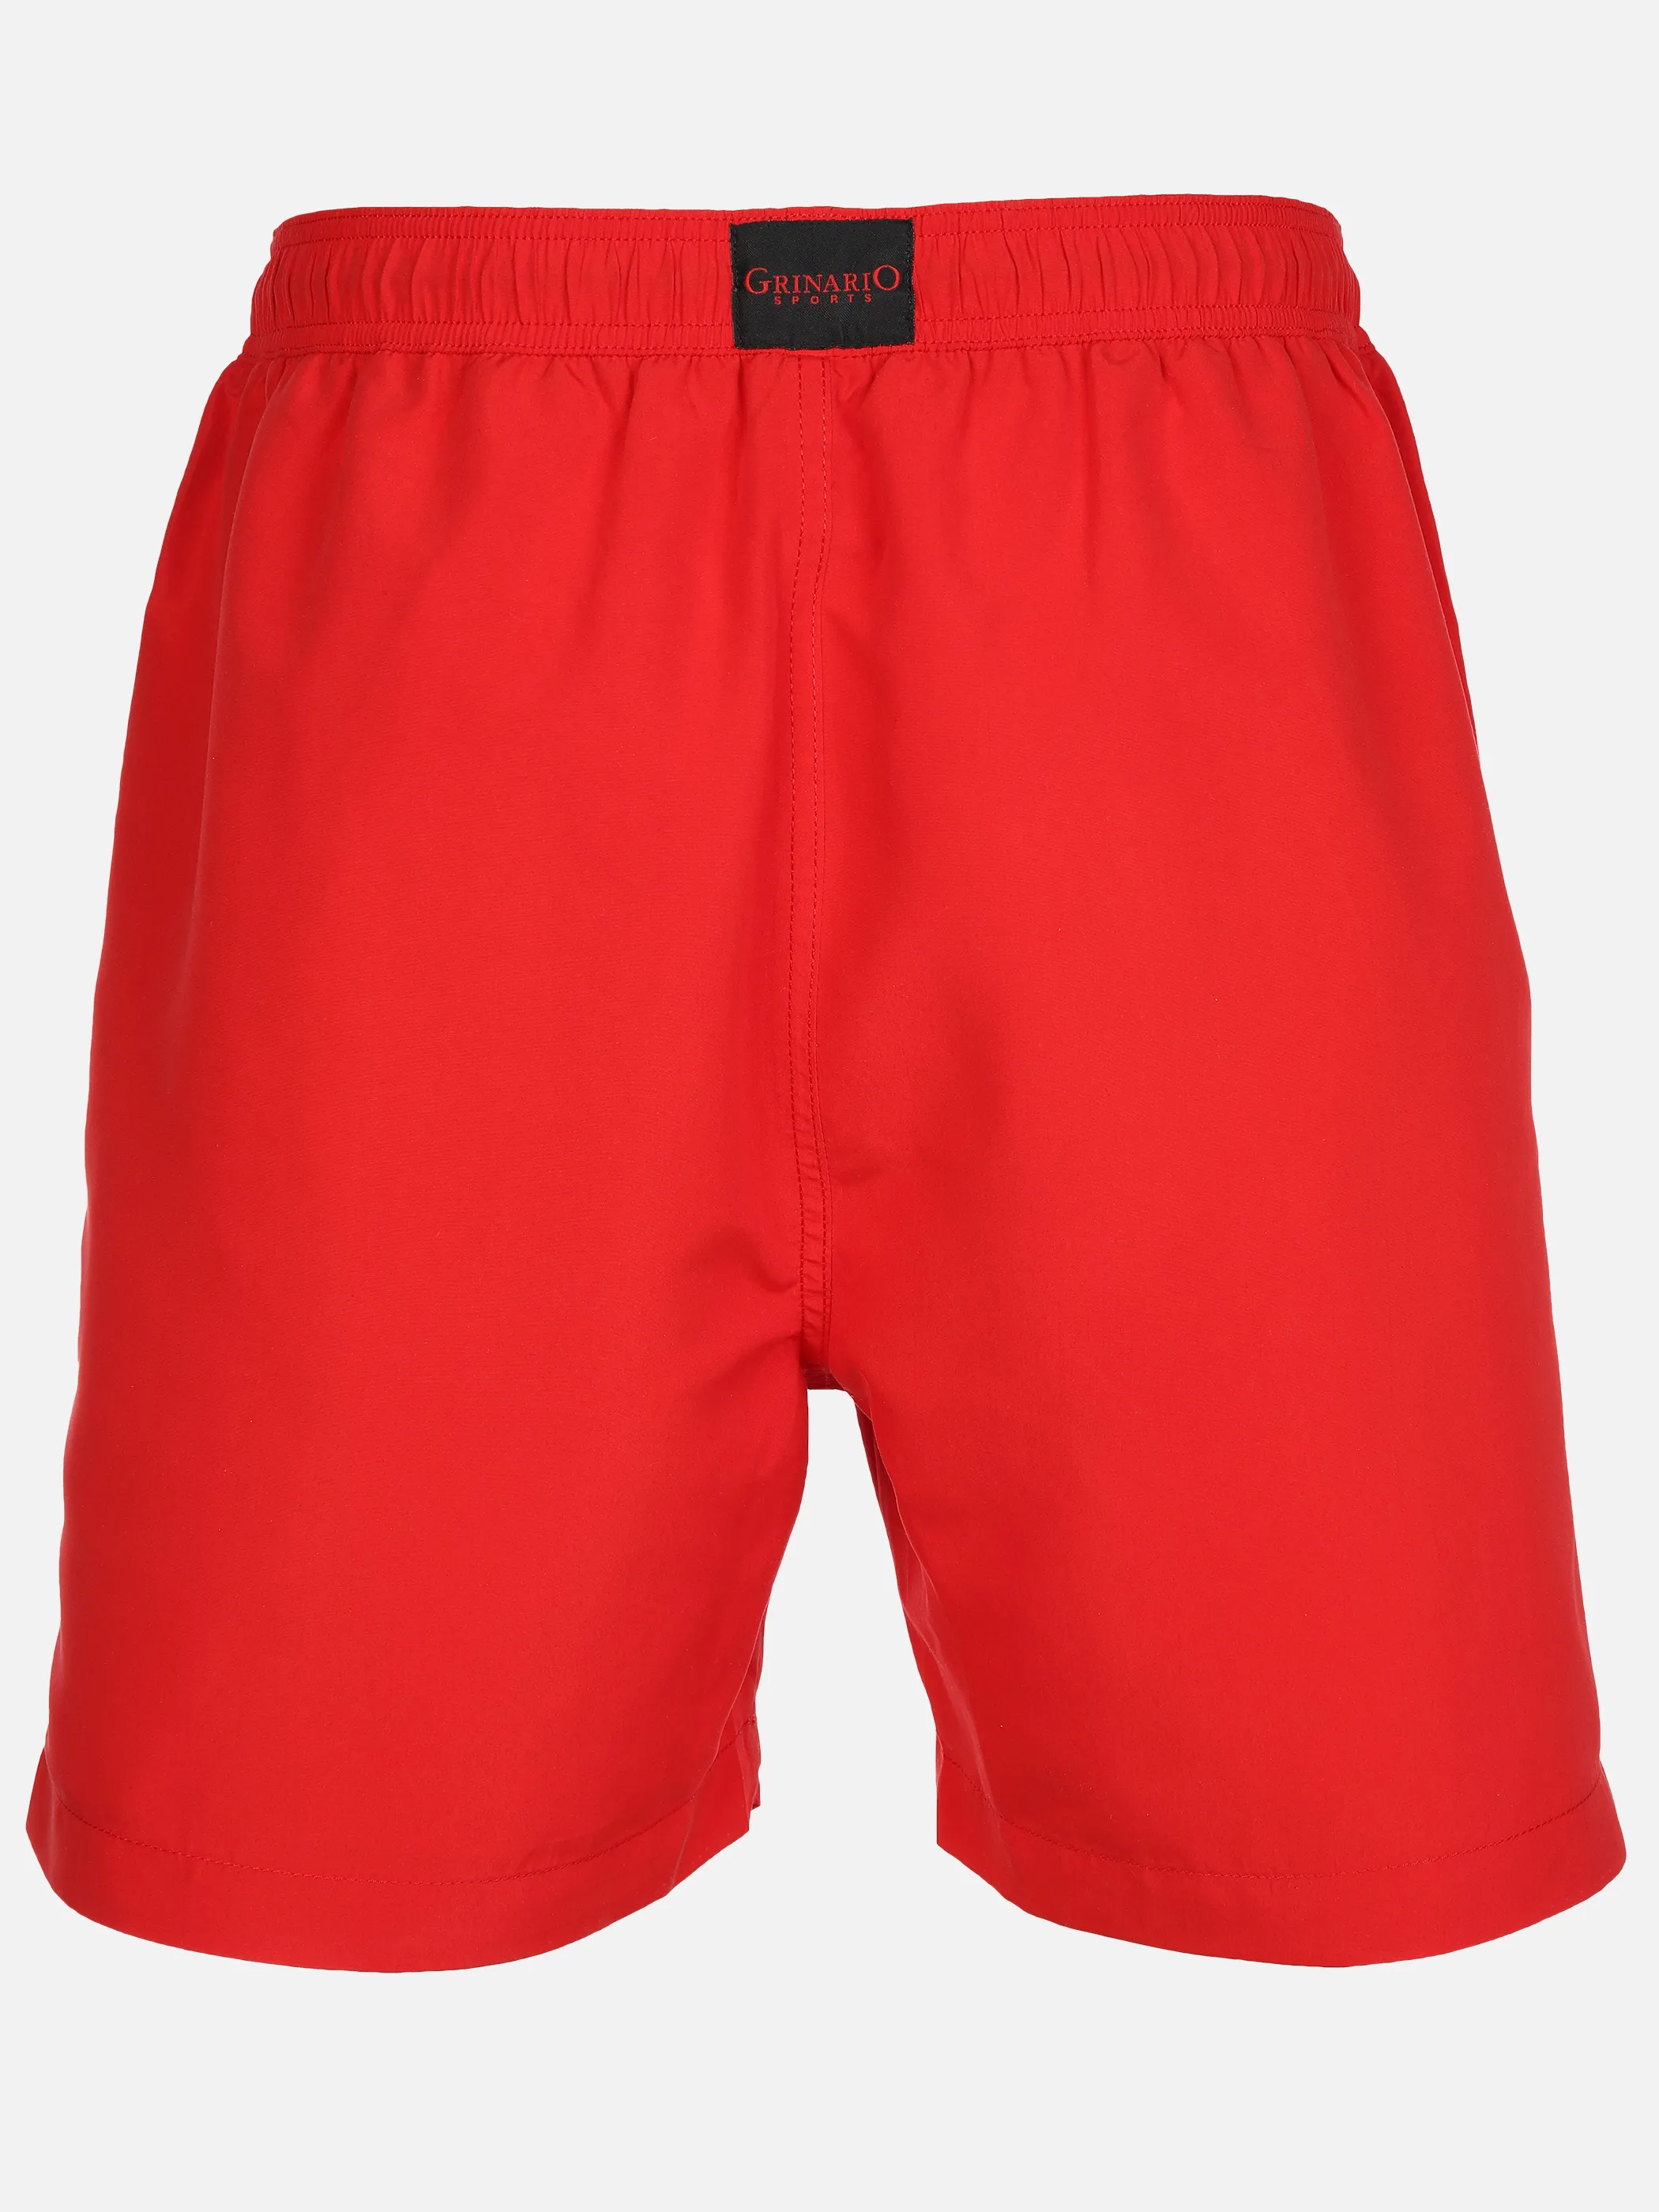 Grinario Sports He- Badehose uni, mit Kontrast Rot 890155 RED 2